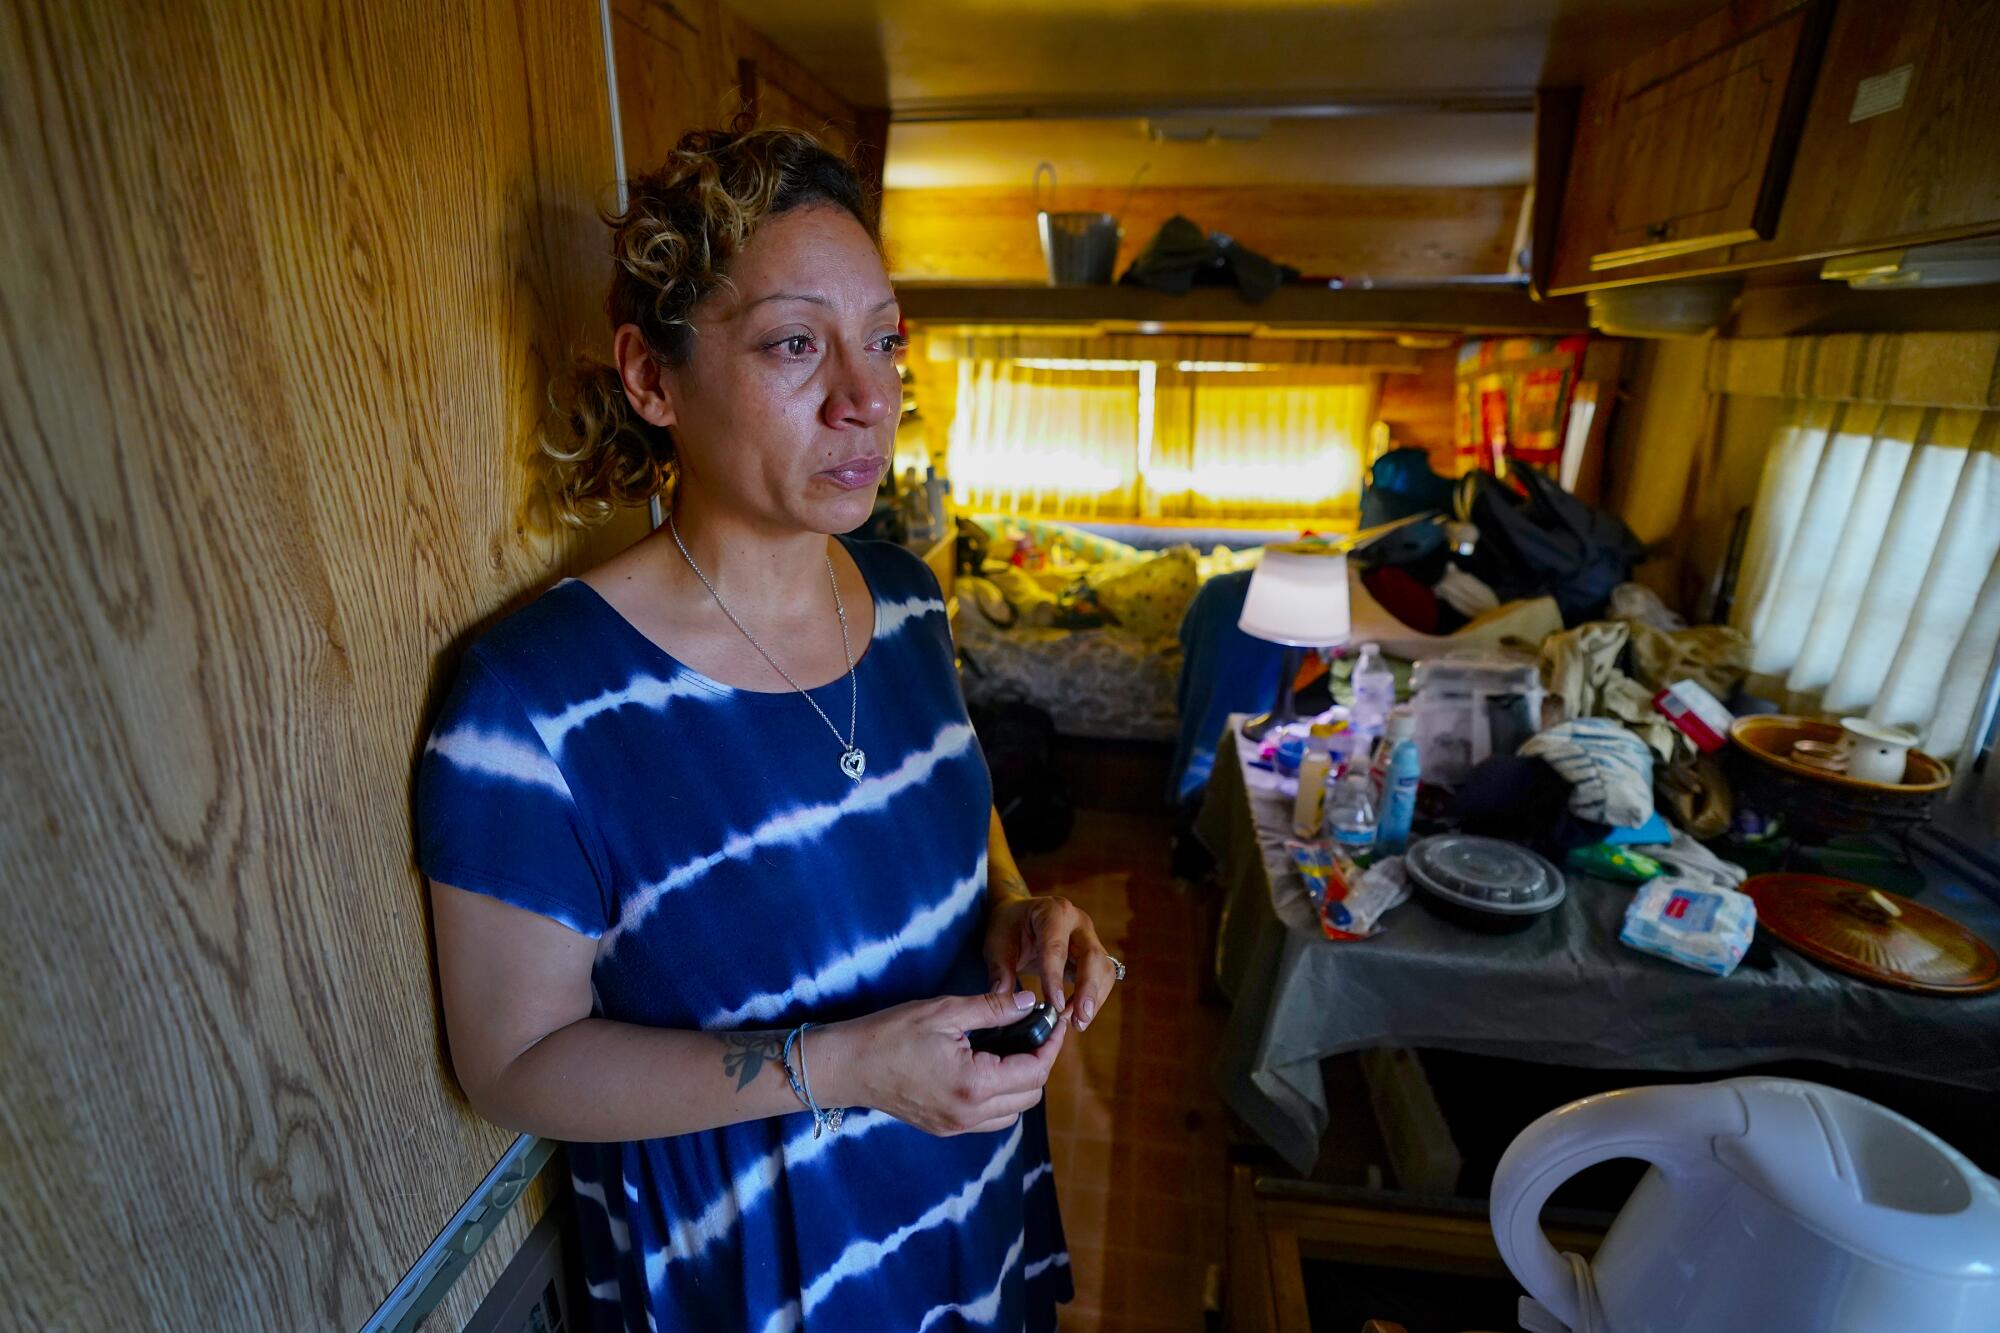 A woman in a cluttered RV trailer